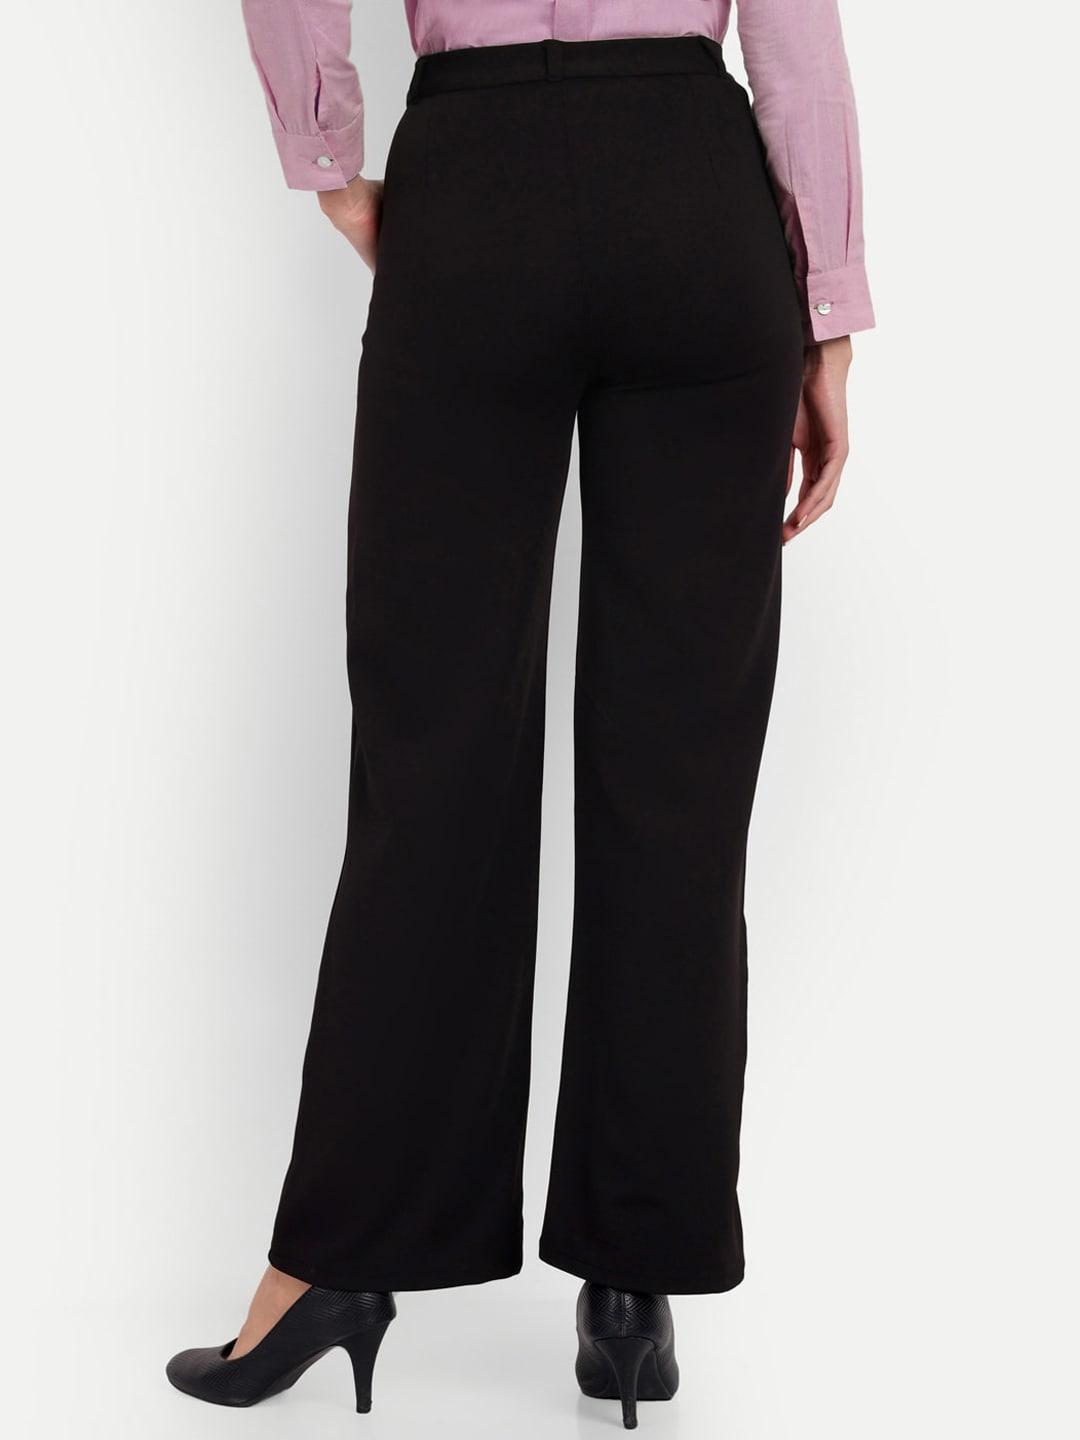 Next One Women Smart Loose Fit High-Rise Easy Wash Trousers